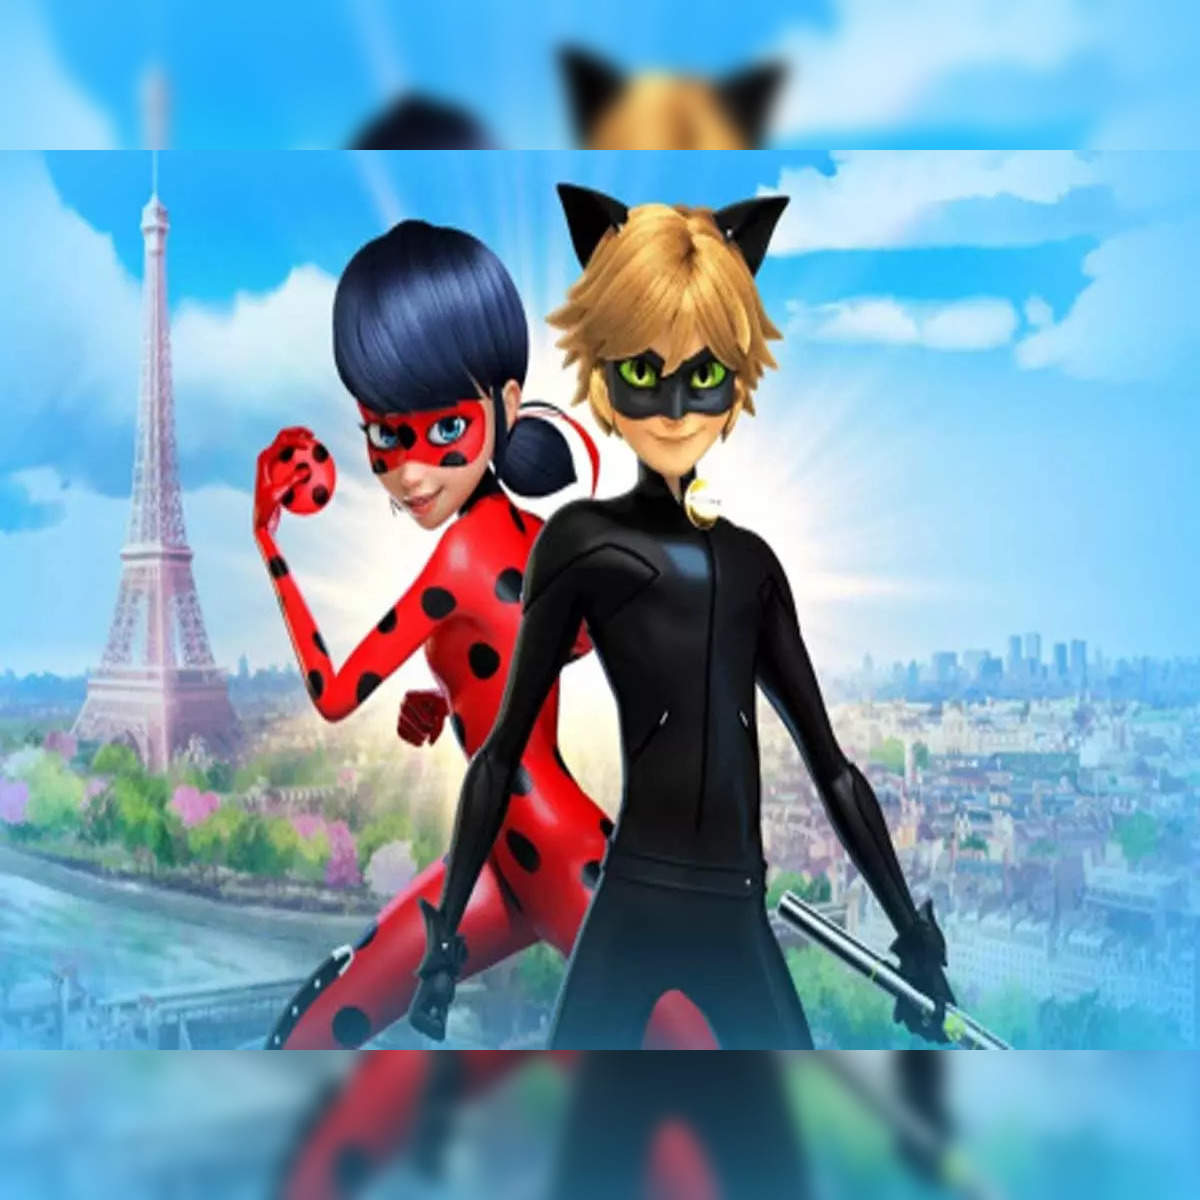 denise elsas add photo show me a picture of miraculous ladybug